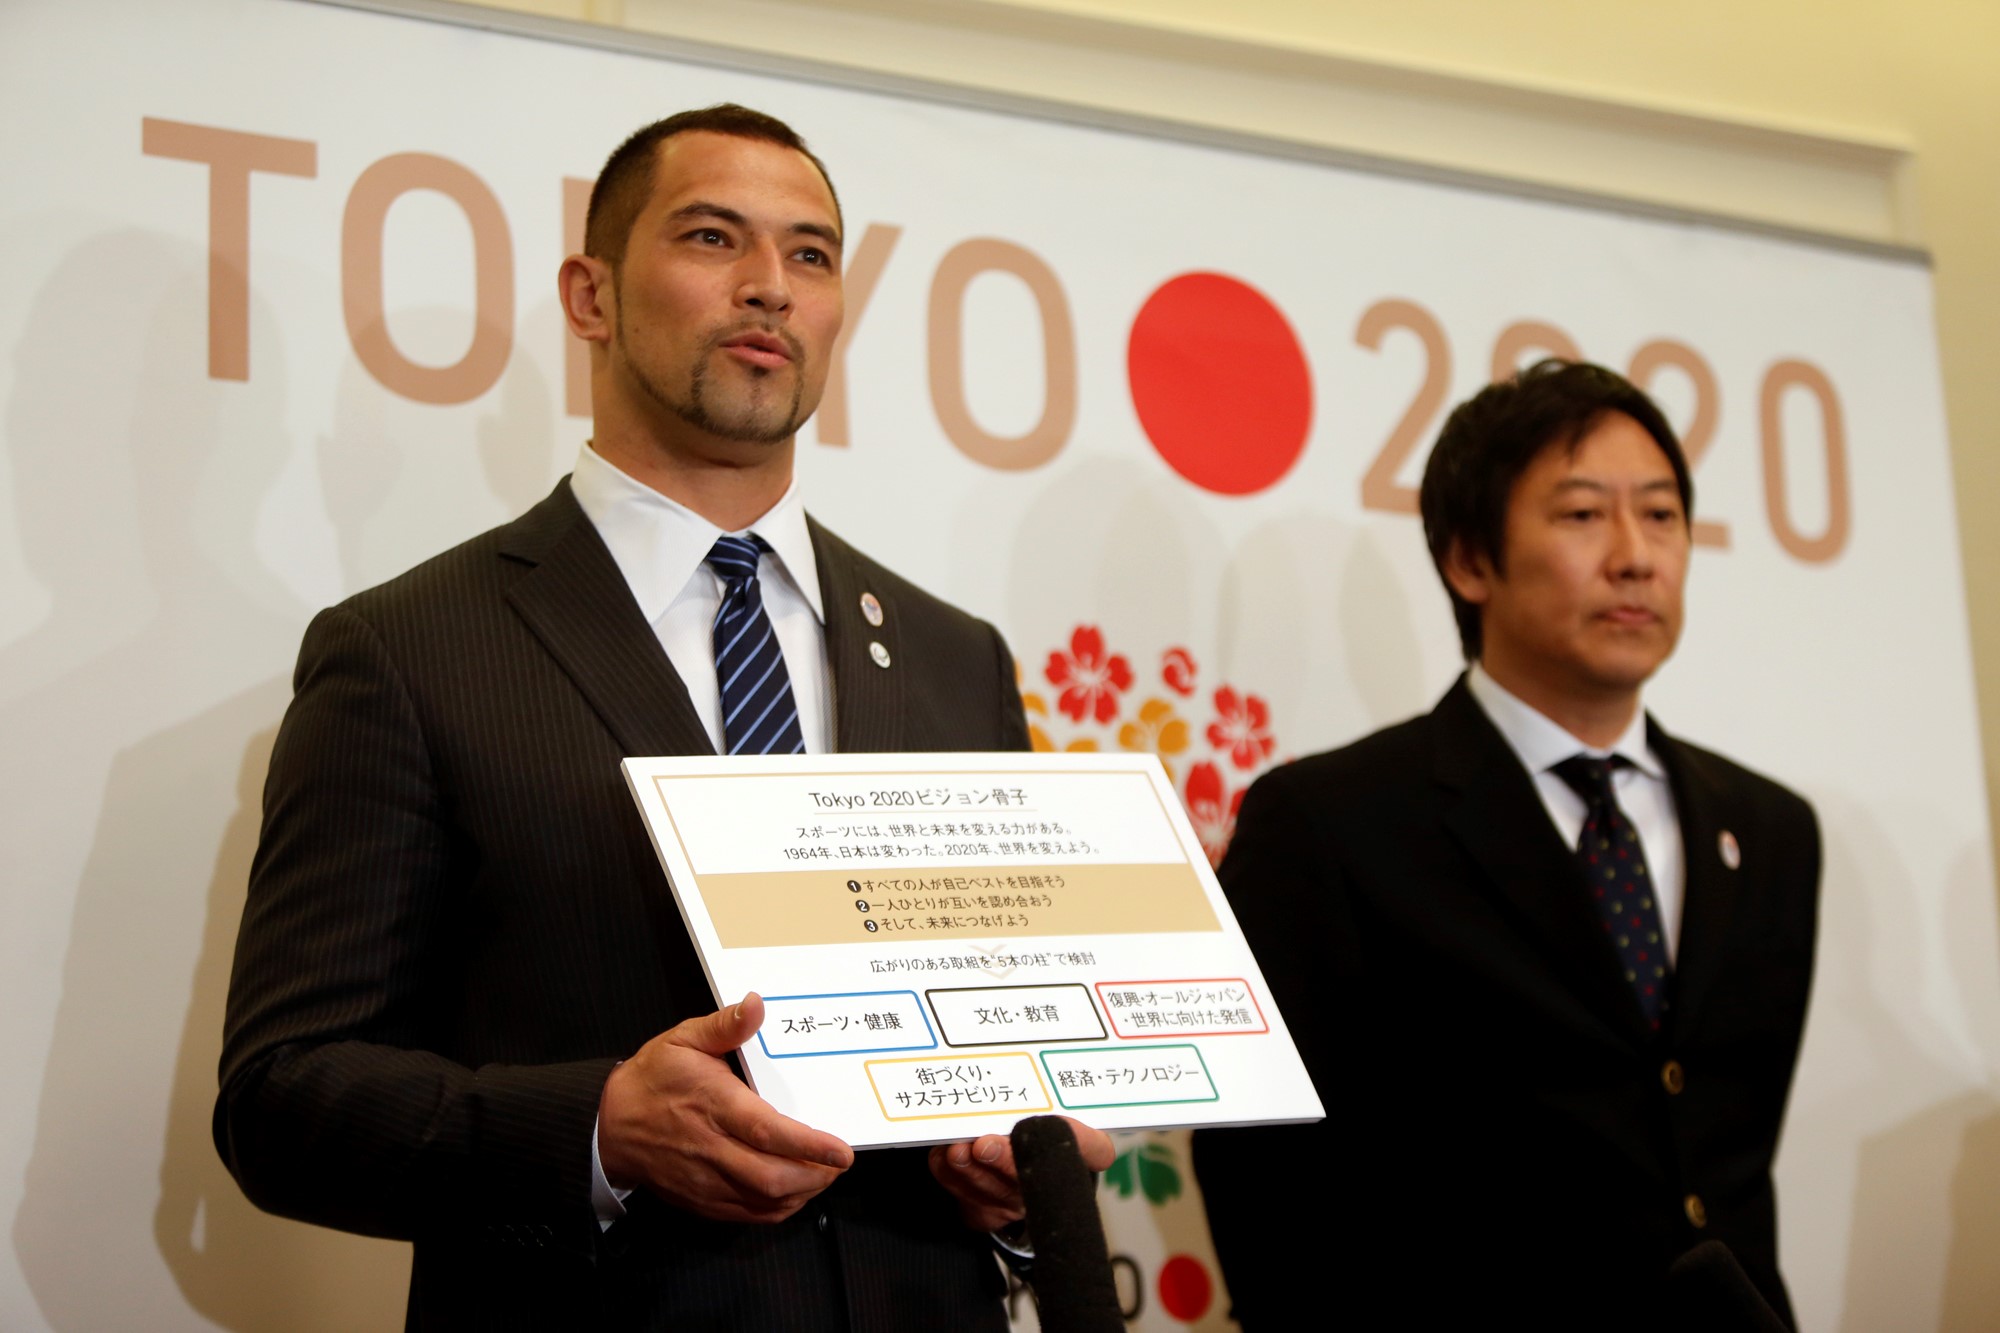 Koji Murofushi will lead the new 2020 Young Athletes' project which is hoped will encourage young athletes to set the Tokyo Olympic Games as their sporting goal ©Tokyo 2020